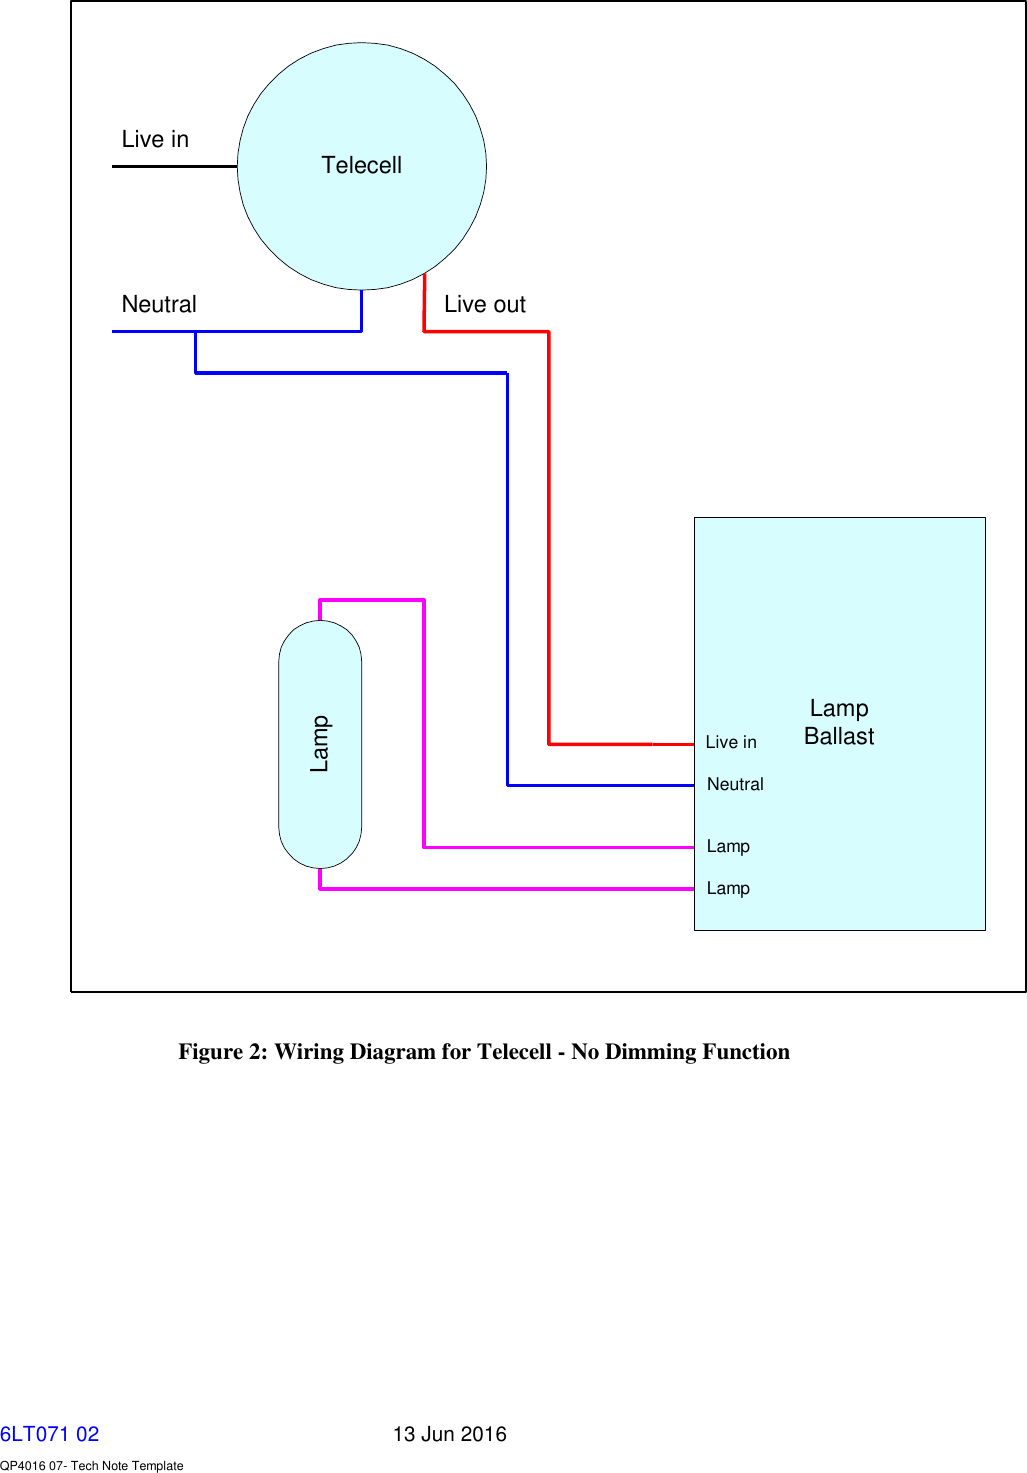   6LT071 02       13 Jun 2016    QP4016 07- Tech Note Template TelecellLampBallastLampLive inNeutral Live outLampLampNeutralLive in Figure 2: Wiring Diagram for Telecell - No Dimming Function   